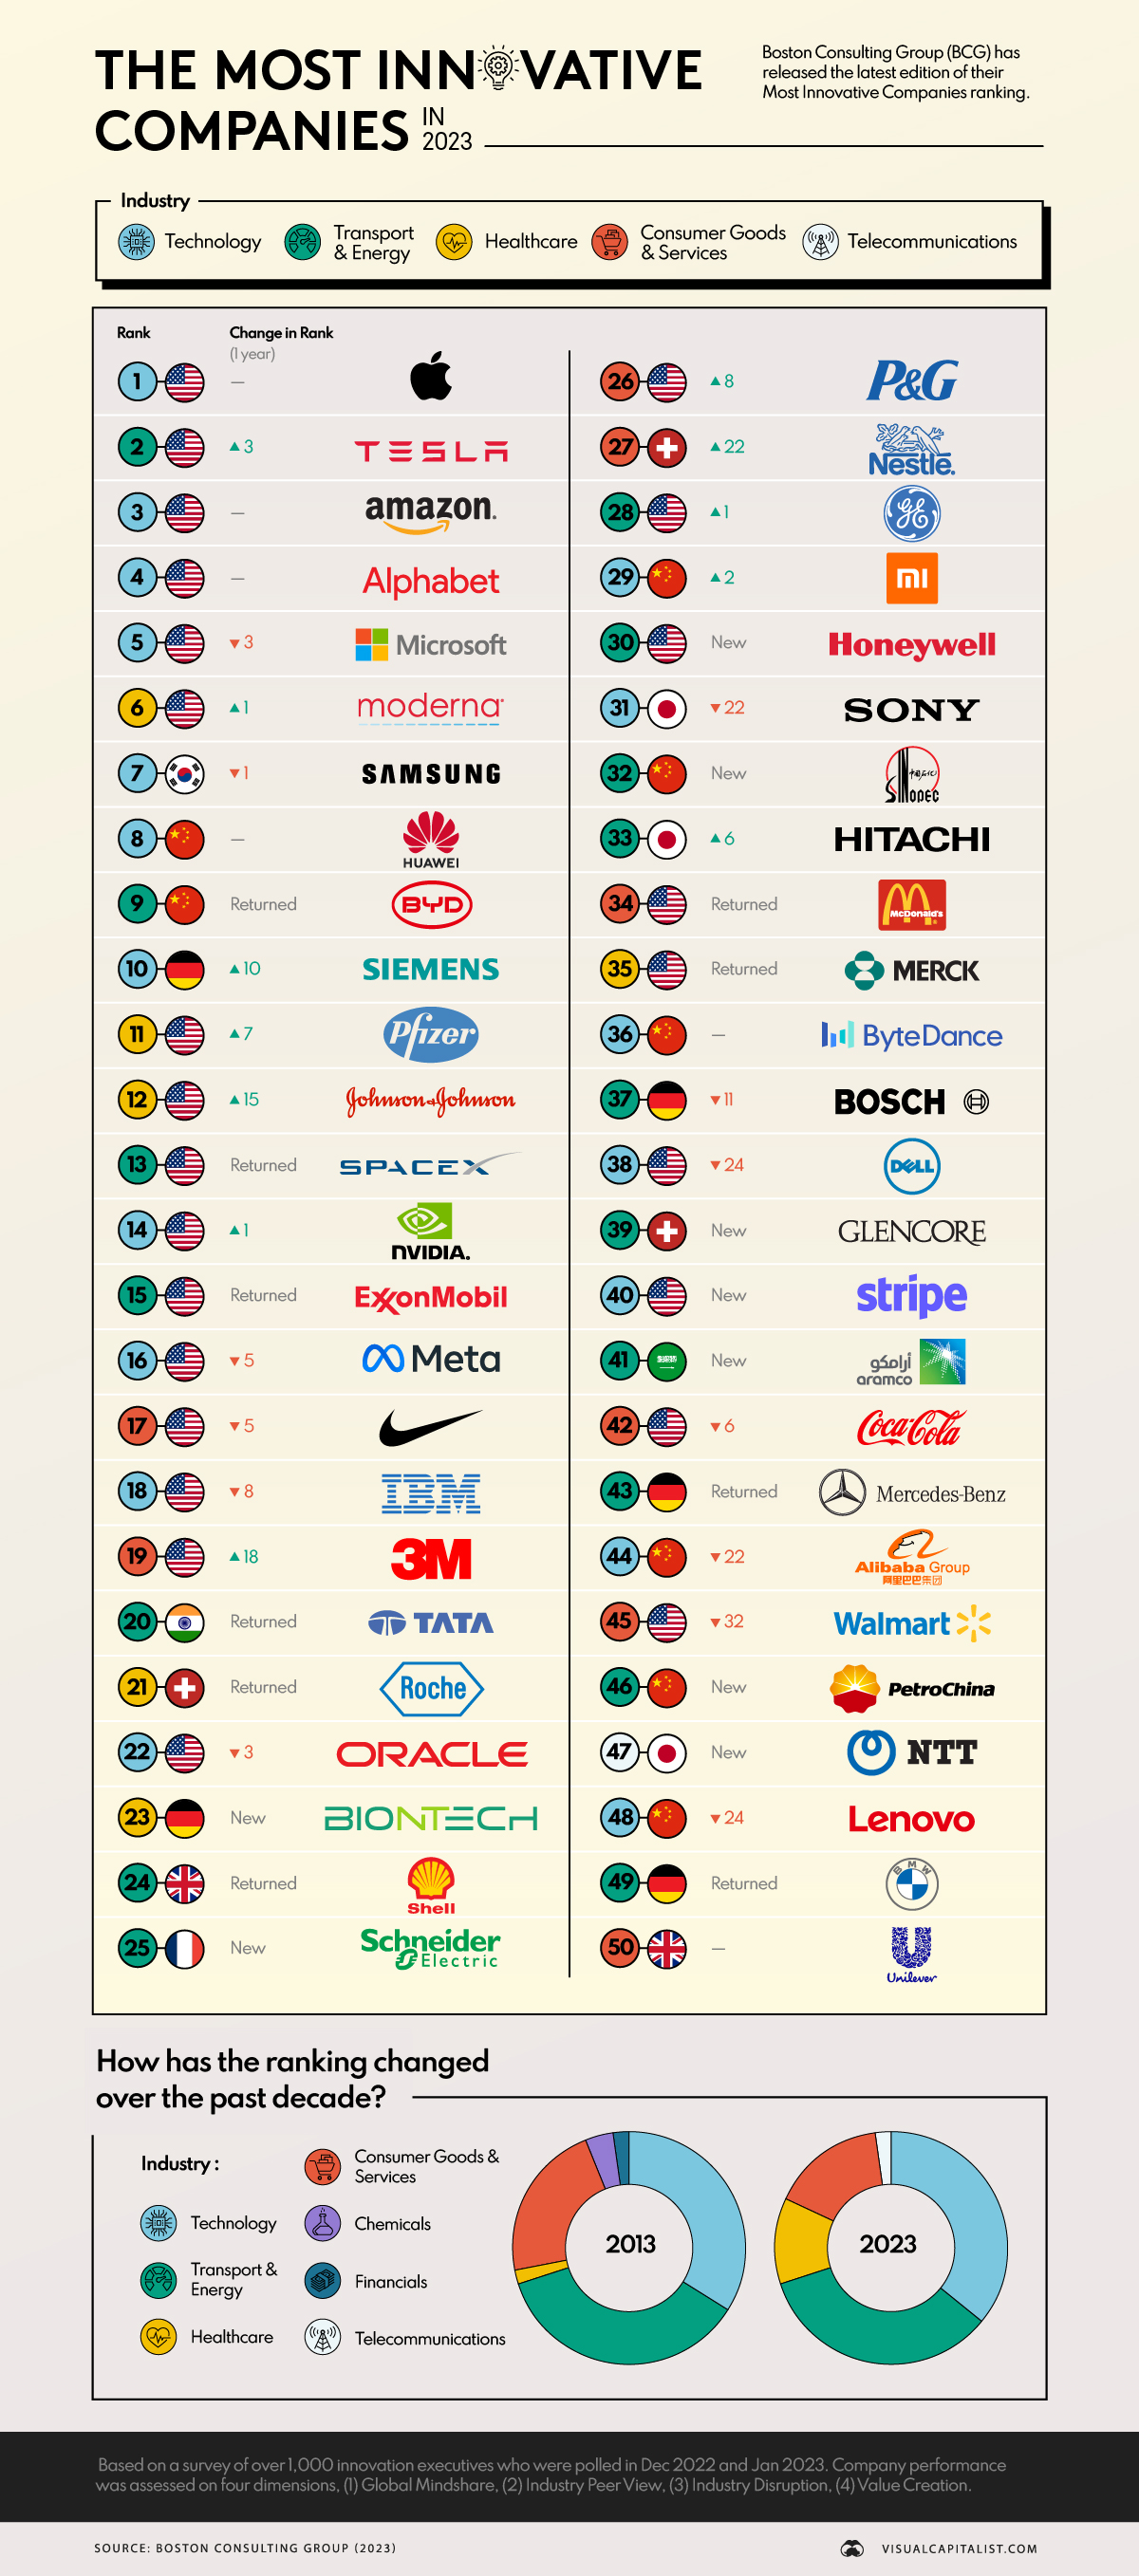 The Most Innovative Companies in 2023